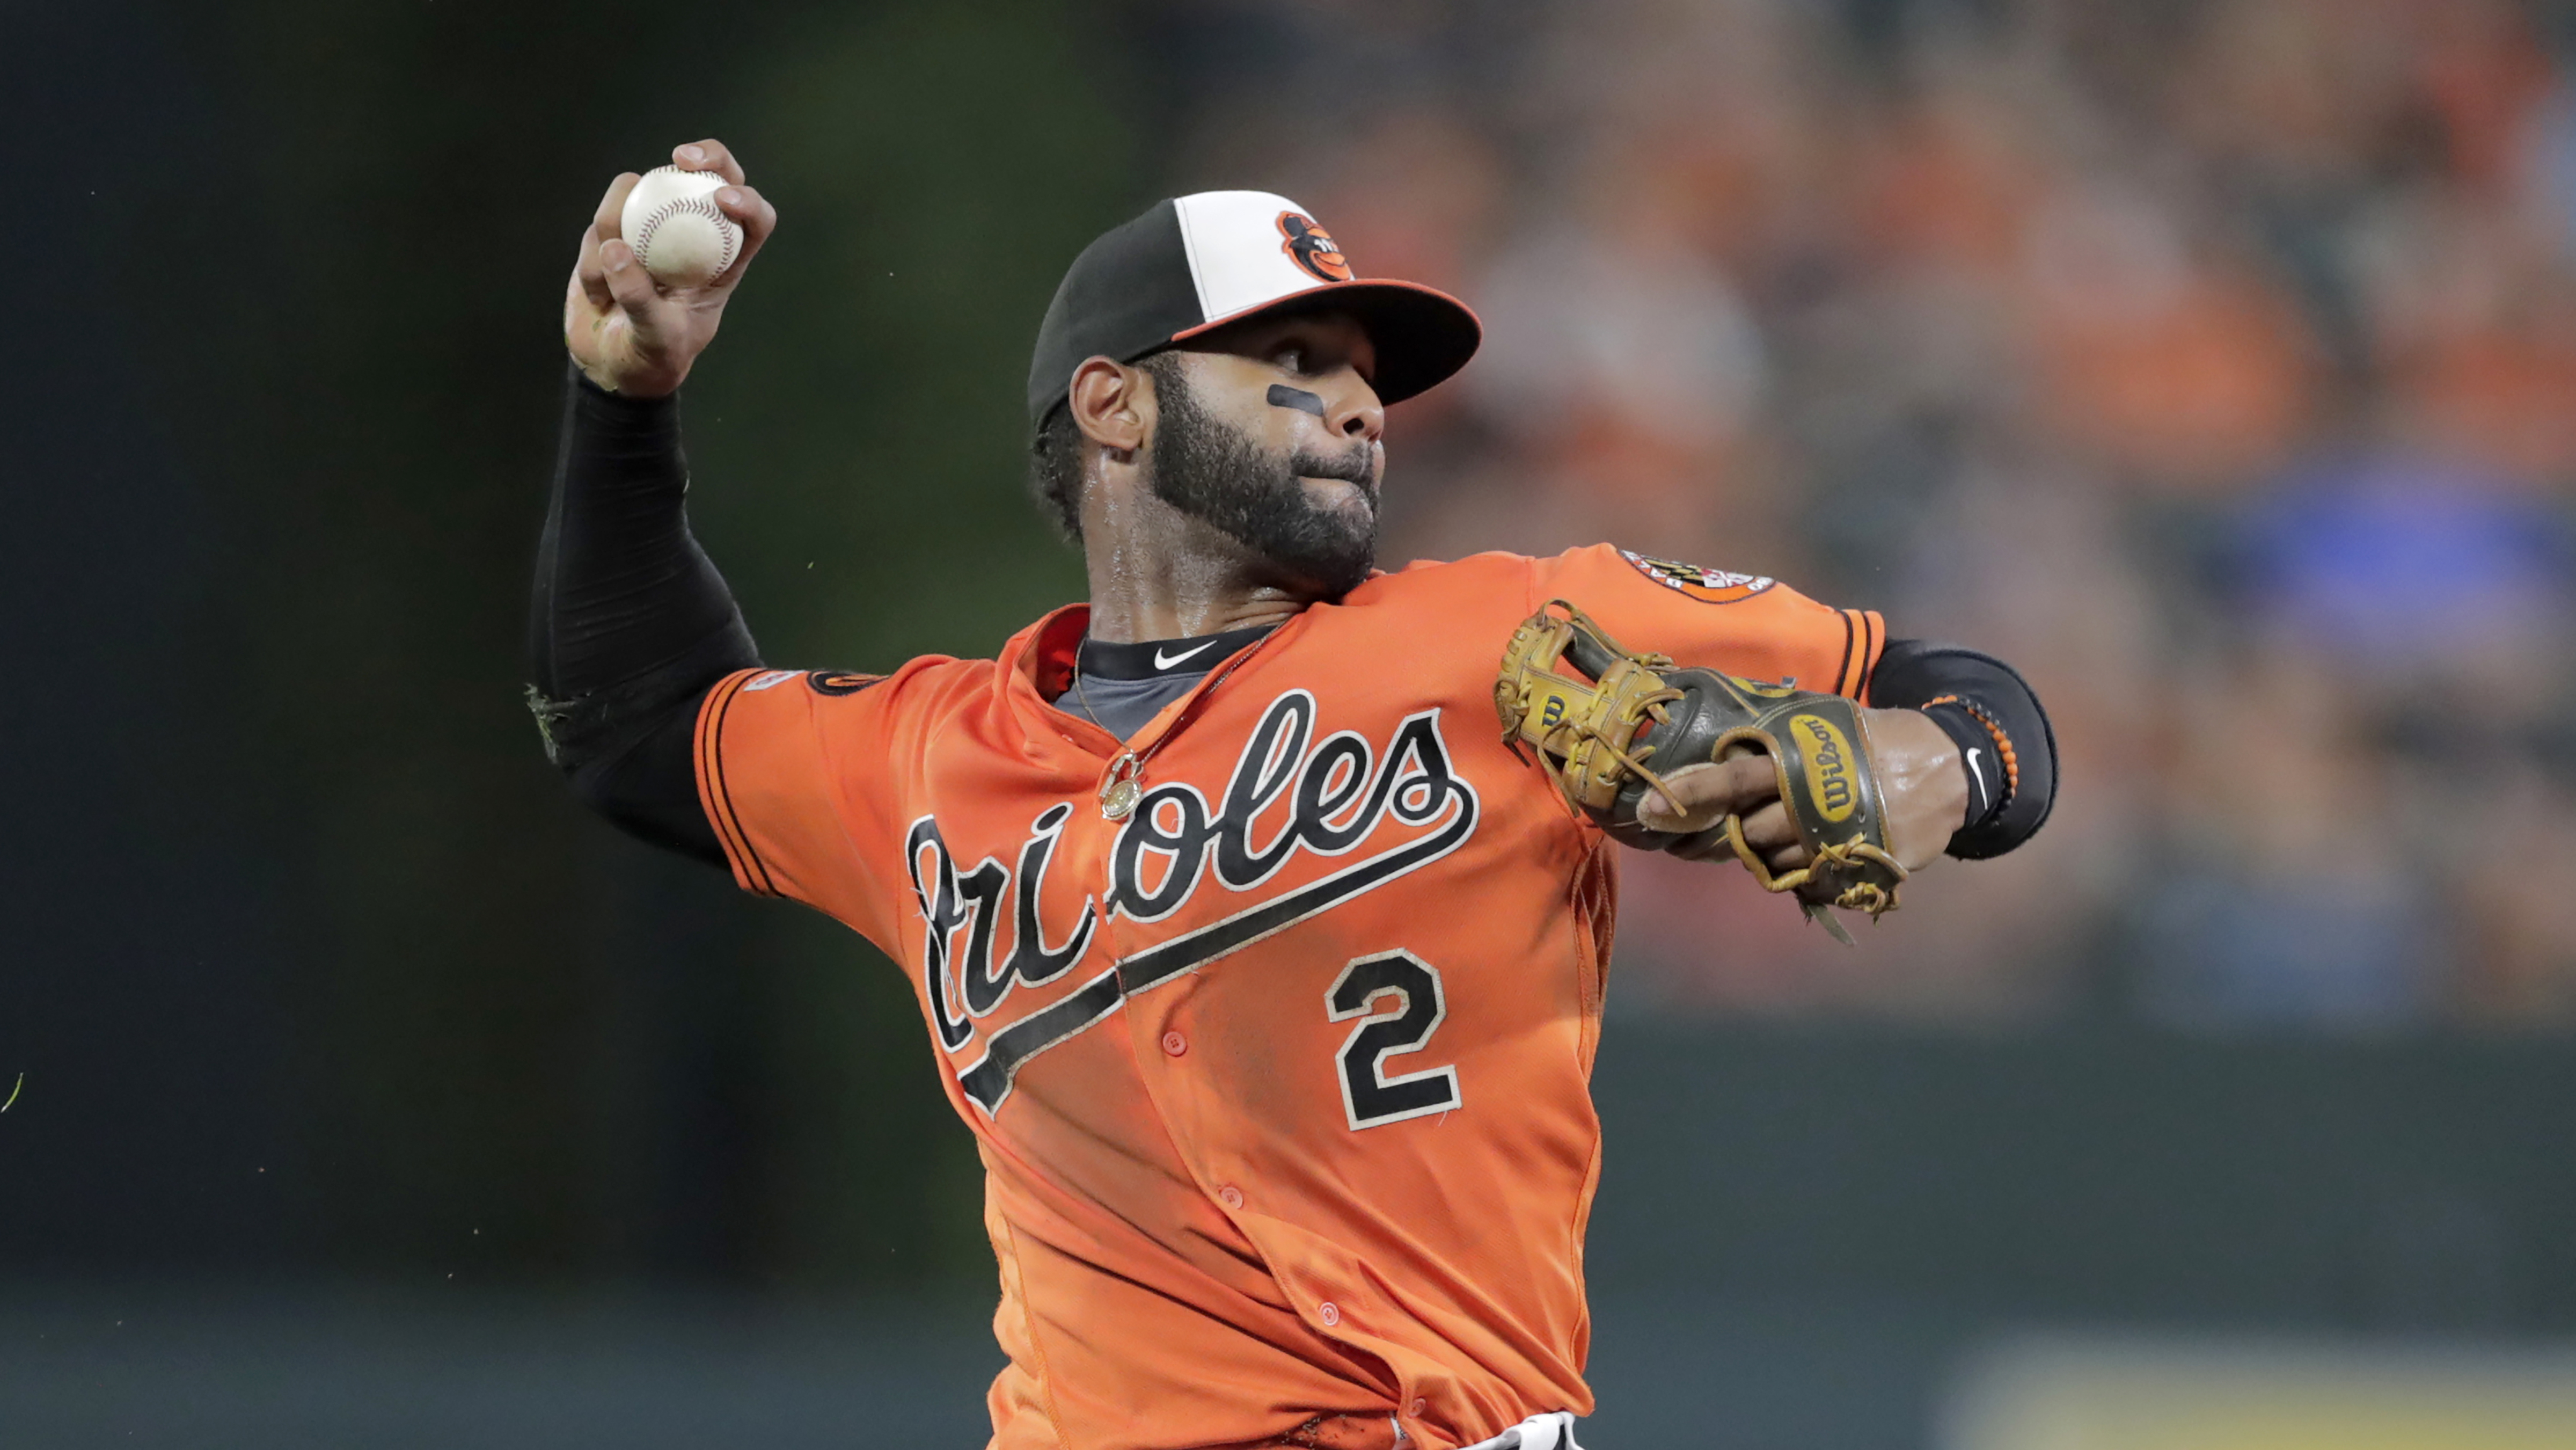 The Baltimore Orioles at Camden Yards: A Peter Angelos Experiment